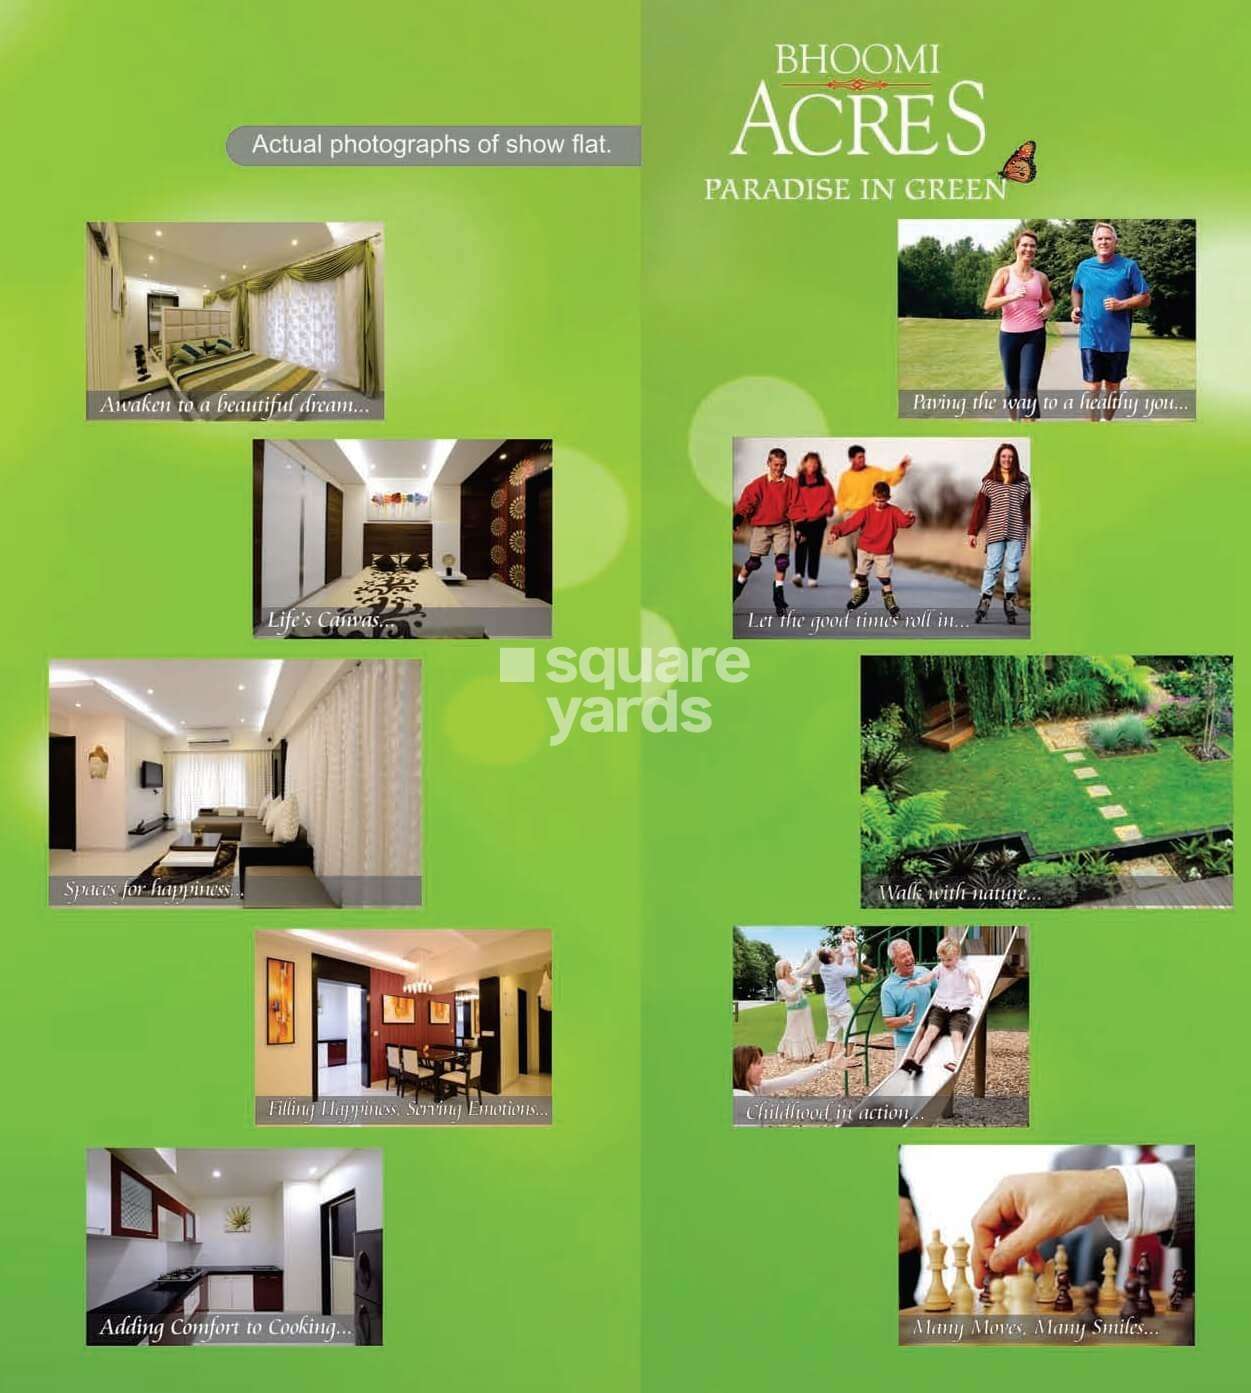 bhoomi acres m wing amenities features2